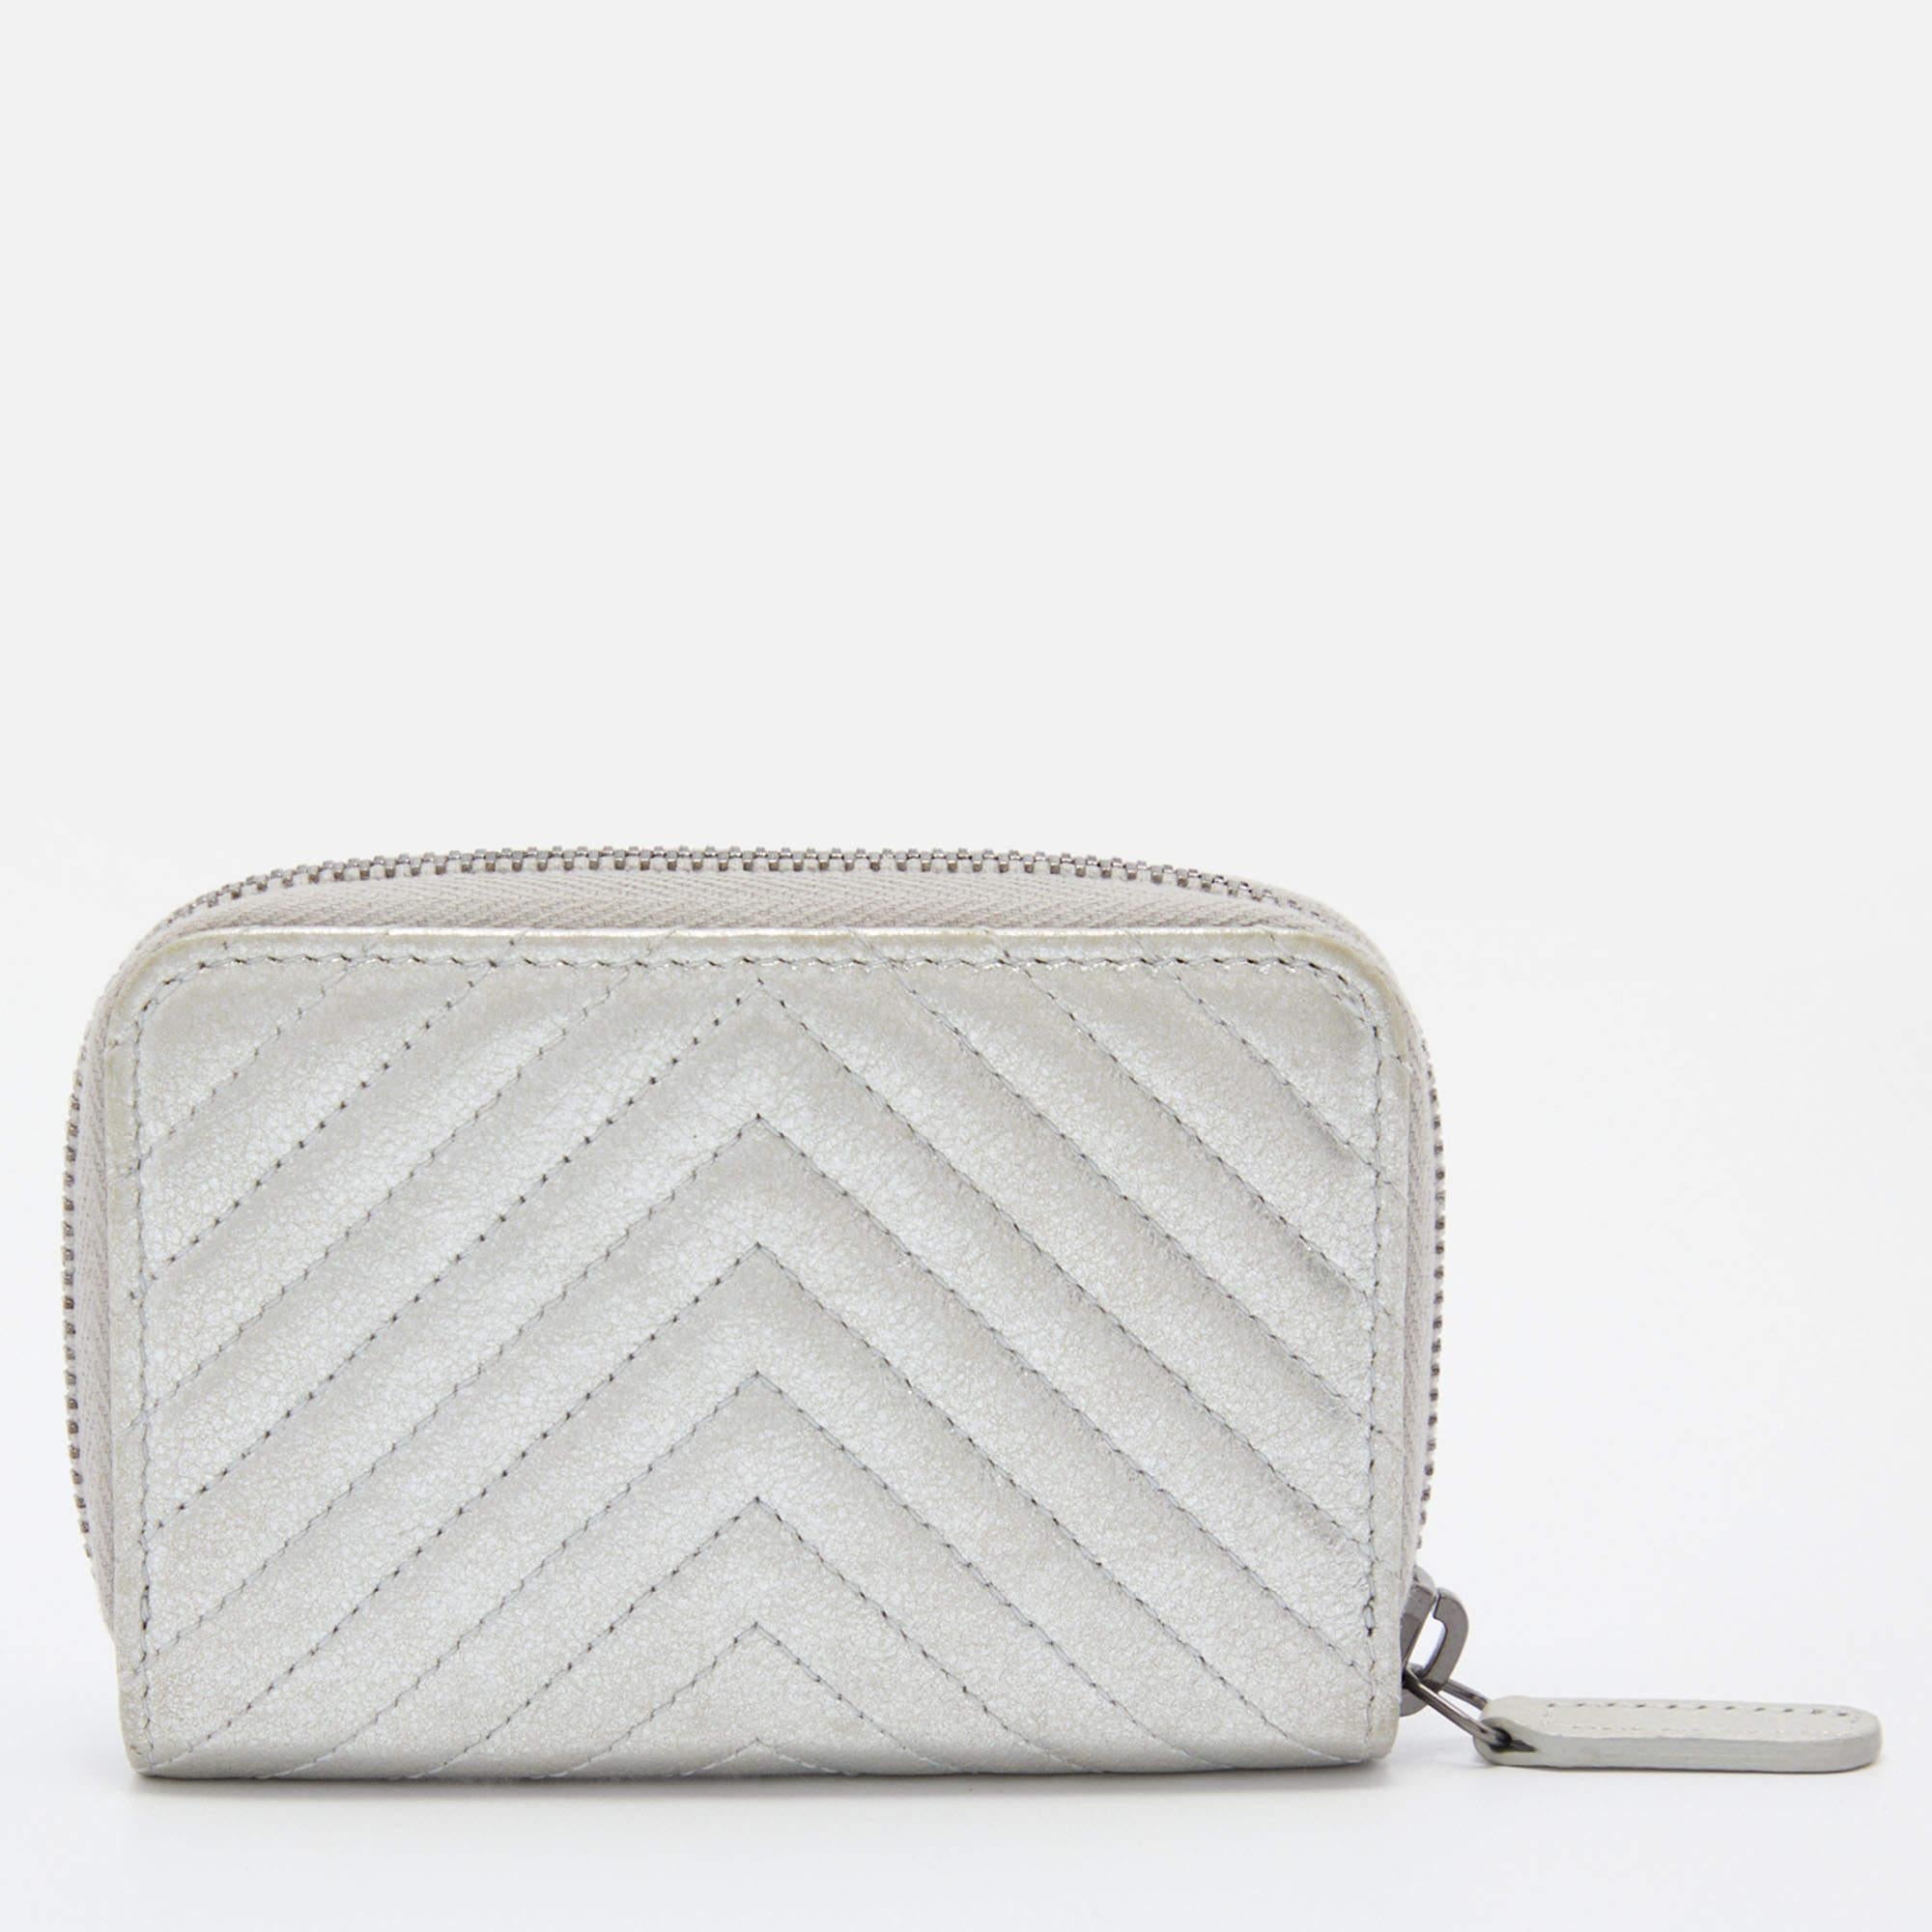 The compact silhouette of this Chanel coin purse makes it easy to fit into a tote. Created from quilted chevron leather, it flaunts a 'CC' motif on the front, a zip-around closure, and a fabric-lined interior.

